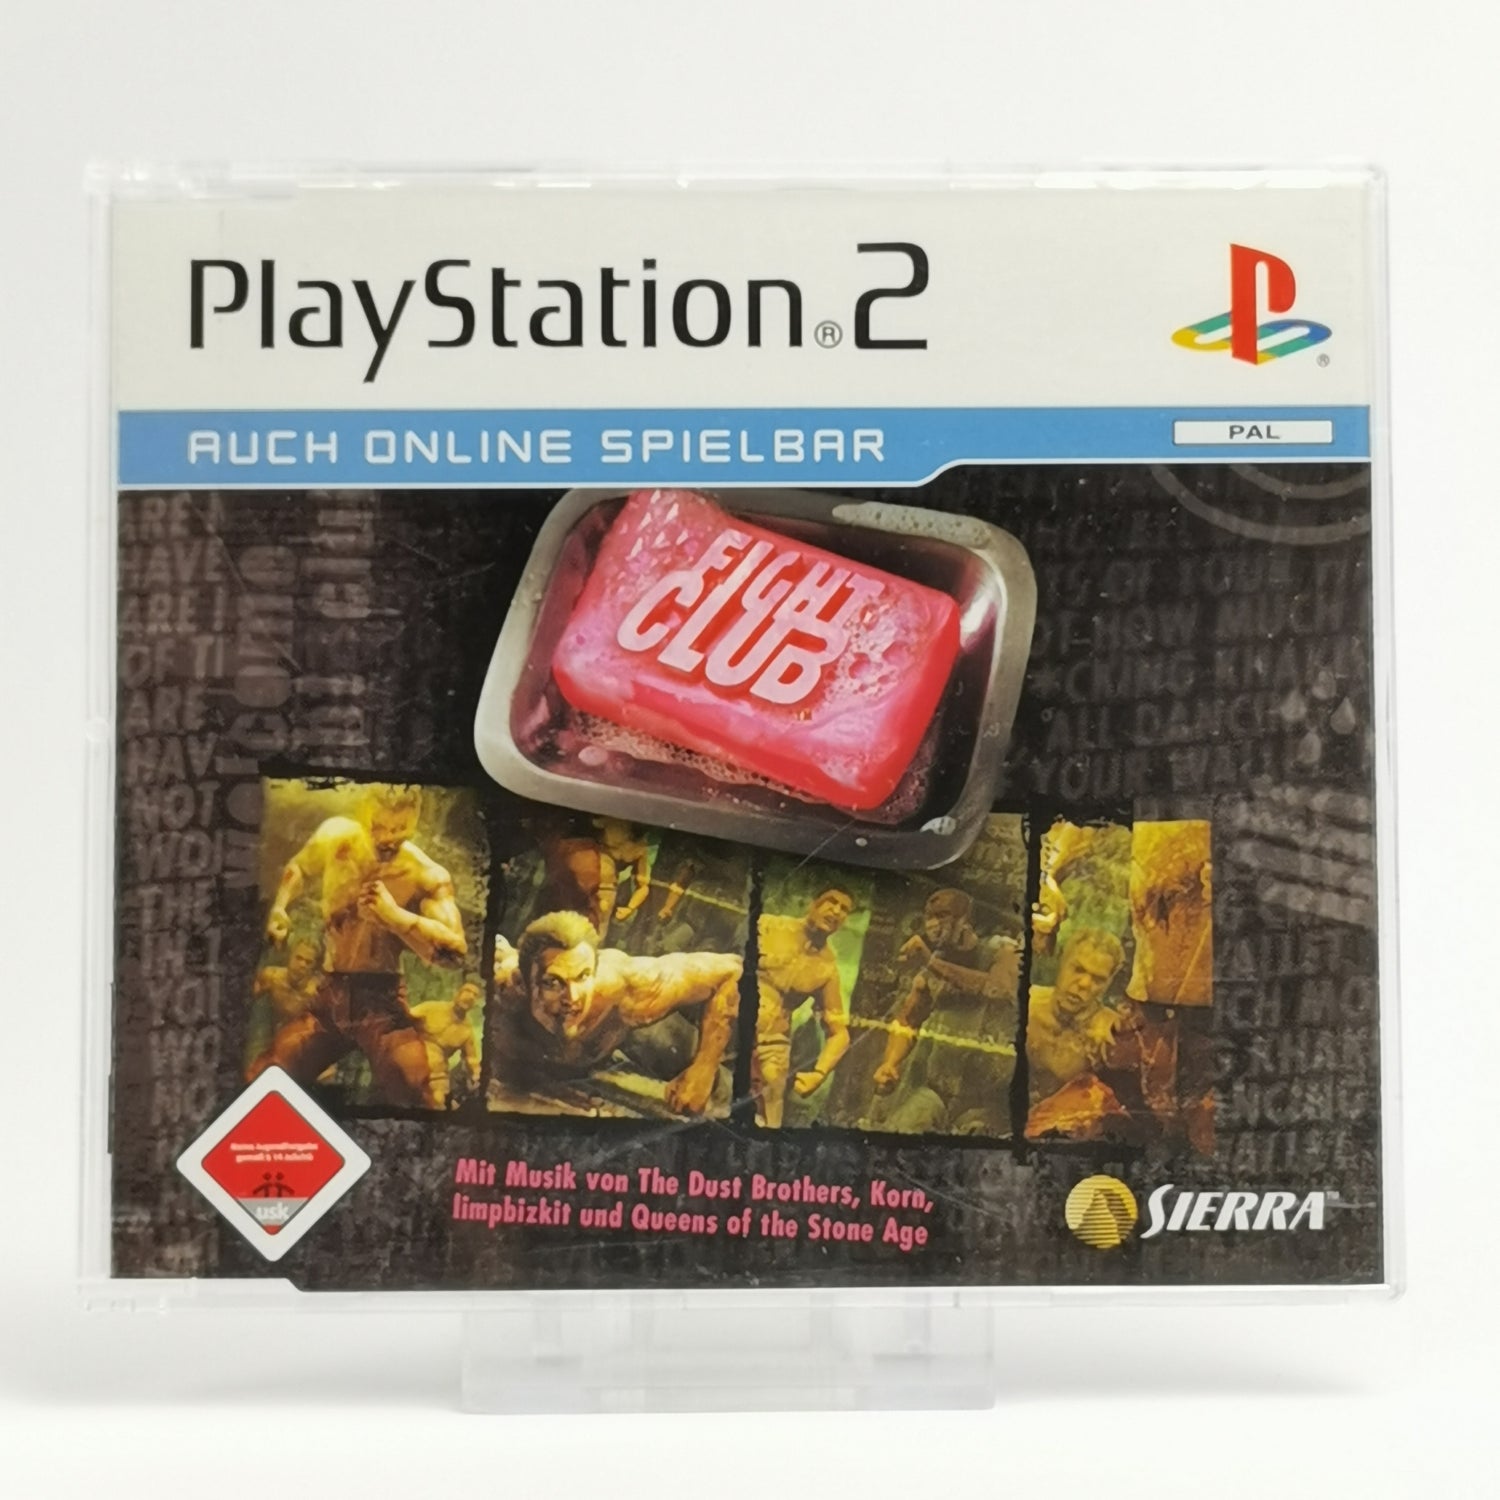 Sony Playstation 2 Promo Game: Fight Club - Full Version USK18 | PS2 OVP PAL